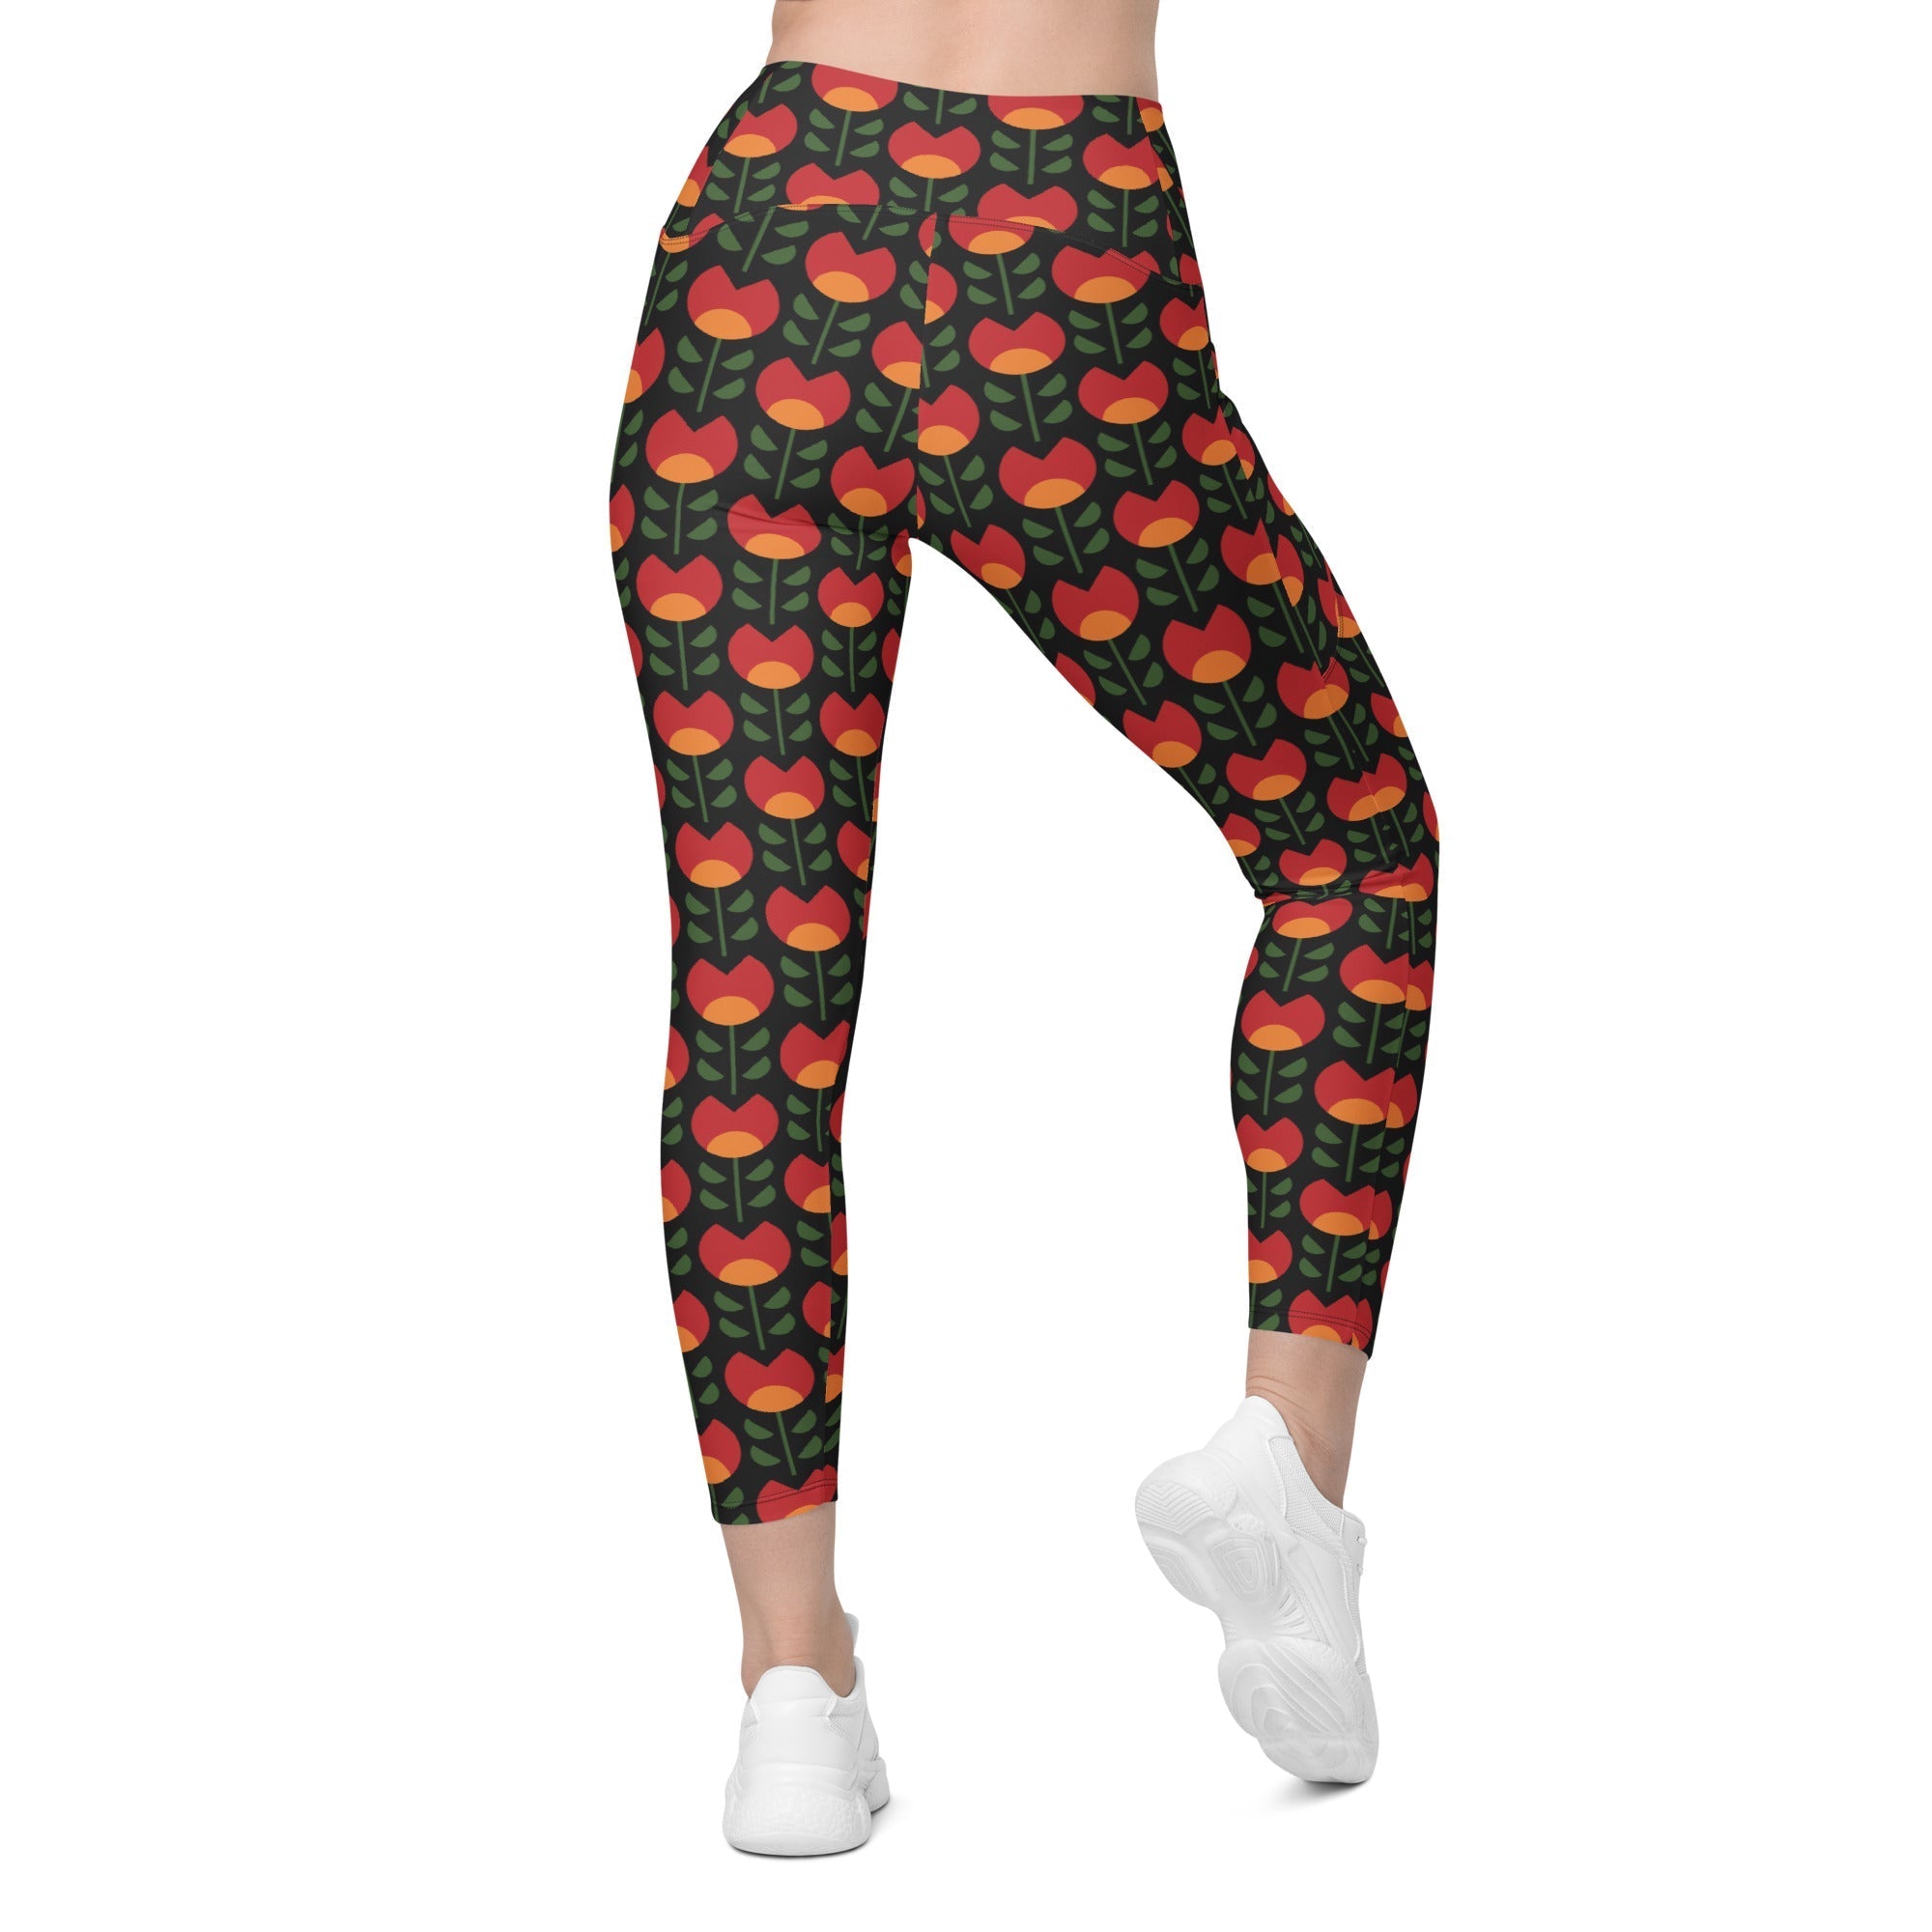 Black History Month Leggings With Pockets